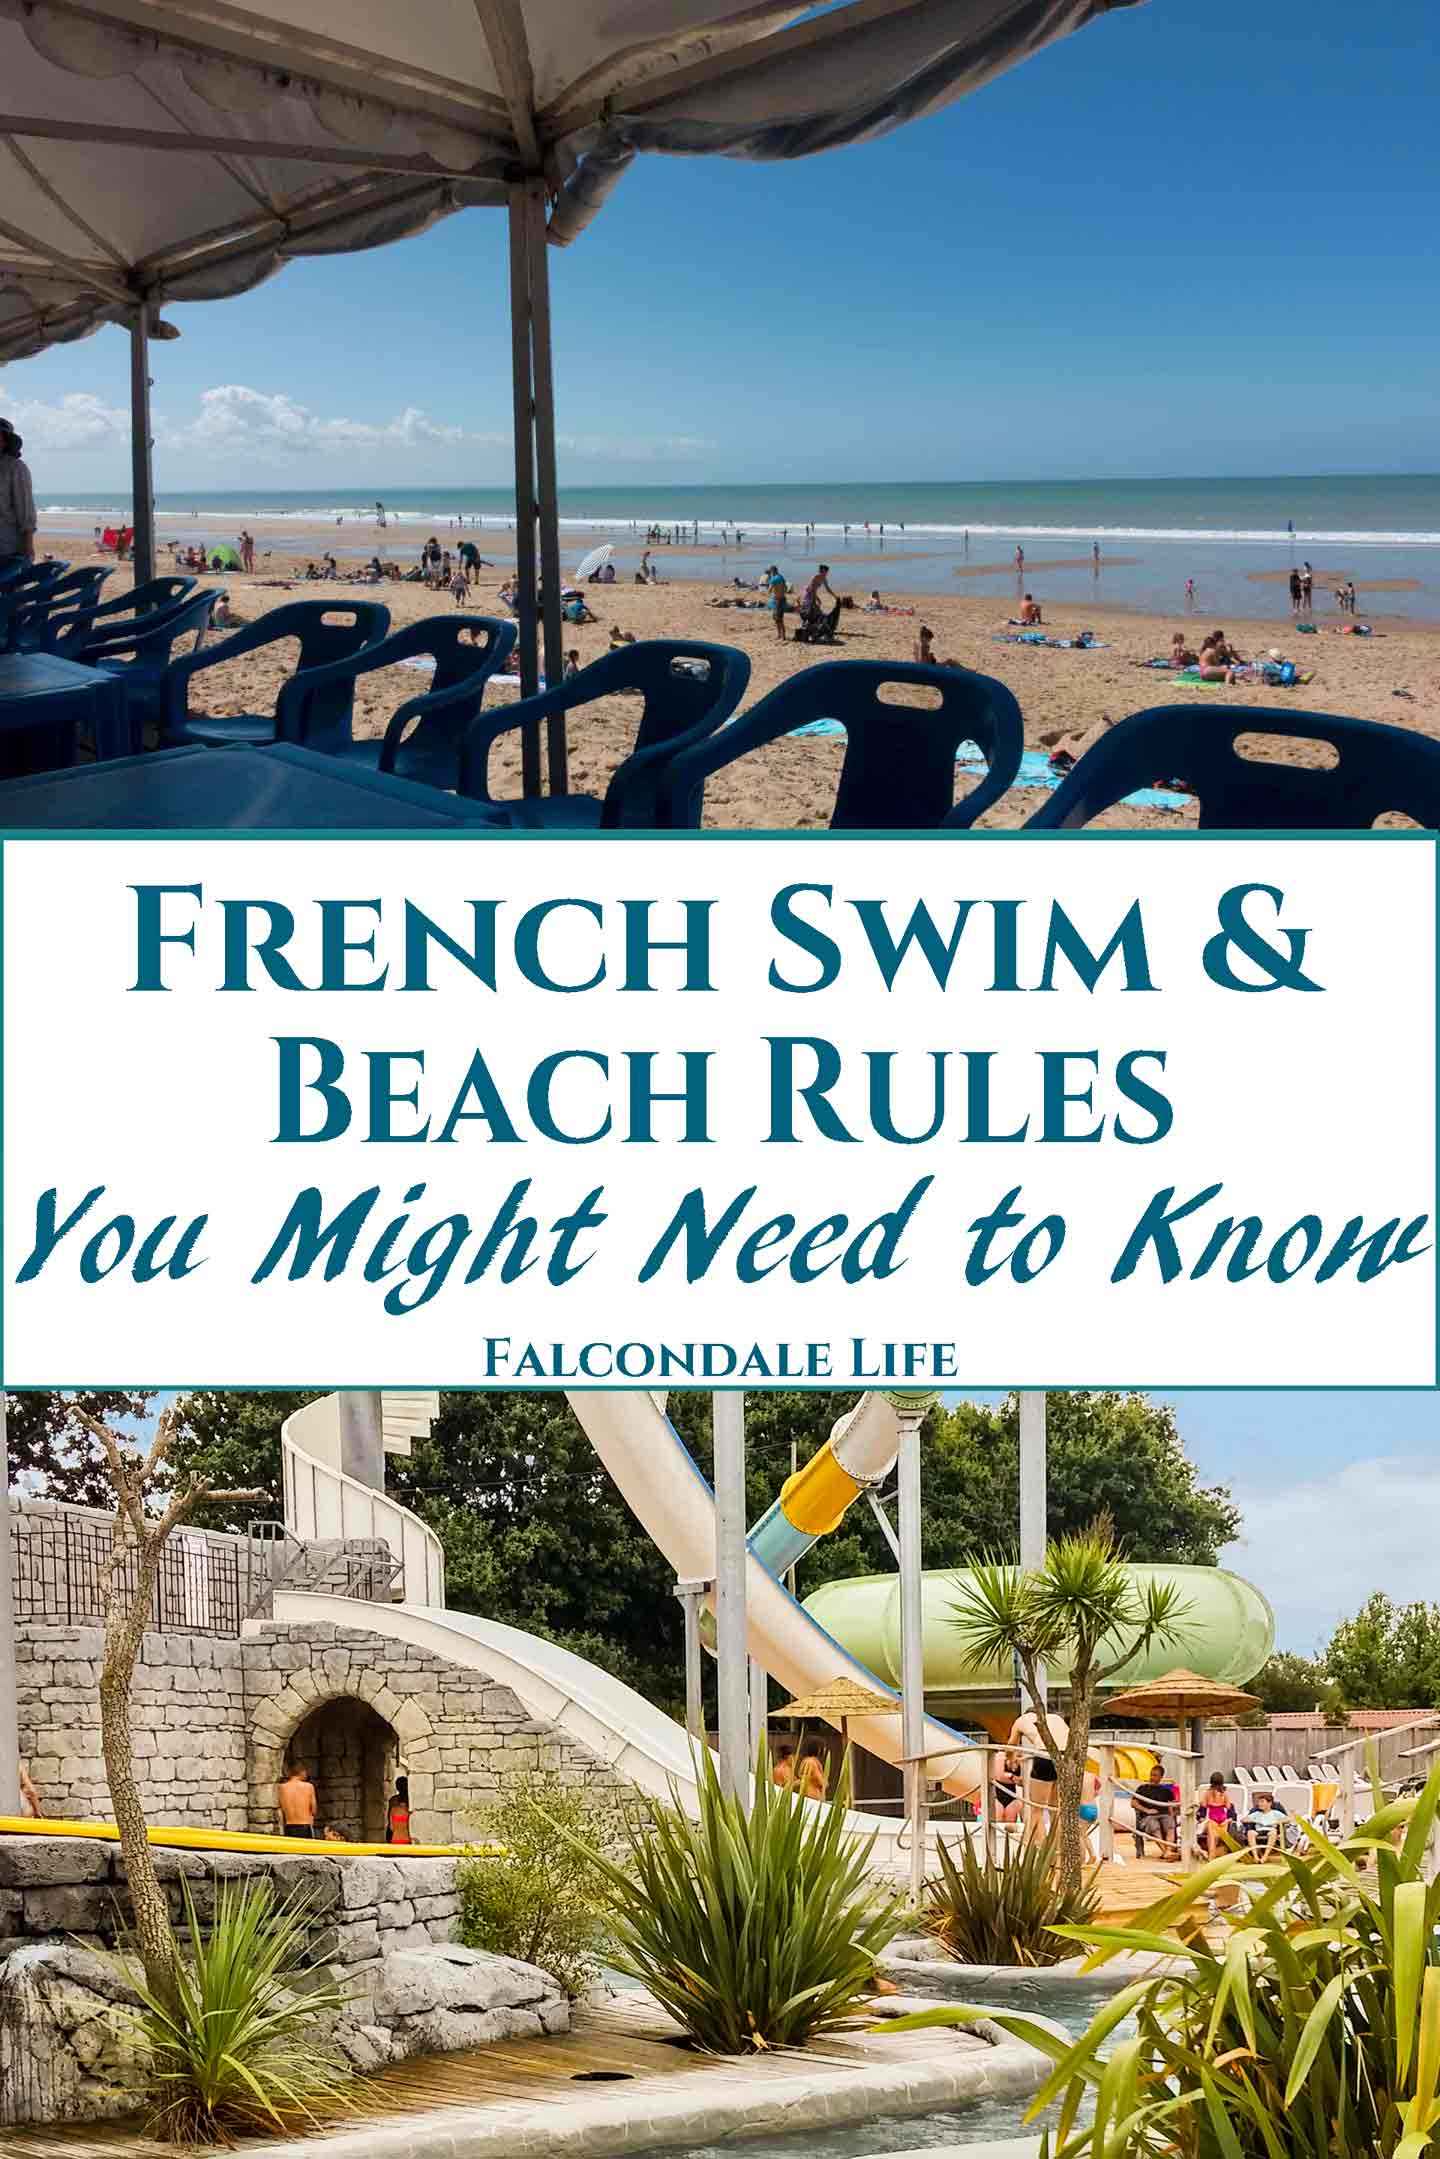 Do men have to wear speedos to swim in France? Can we light a barbecue on the beach or walk a dog? Find out - French Swim and Beach Rules - what you might need to know on Falcondale Life blog. Some rules may surprise you but in France there is a good lifeguard service. Laws are set both nationally and locally. At swimming pools there are commonly some rules about swimwear and suncream. Image description: Beach and French campsite pool plus blog title.